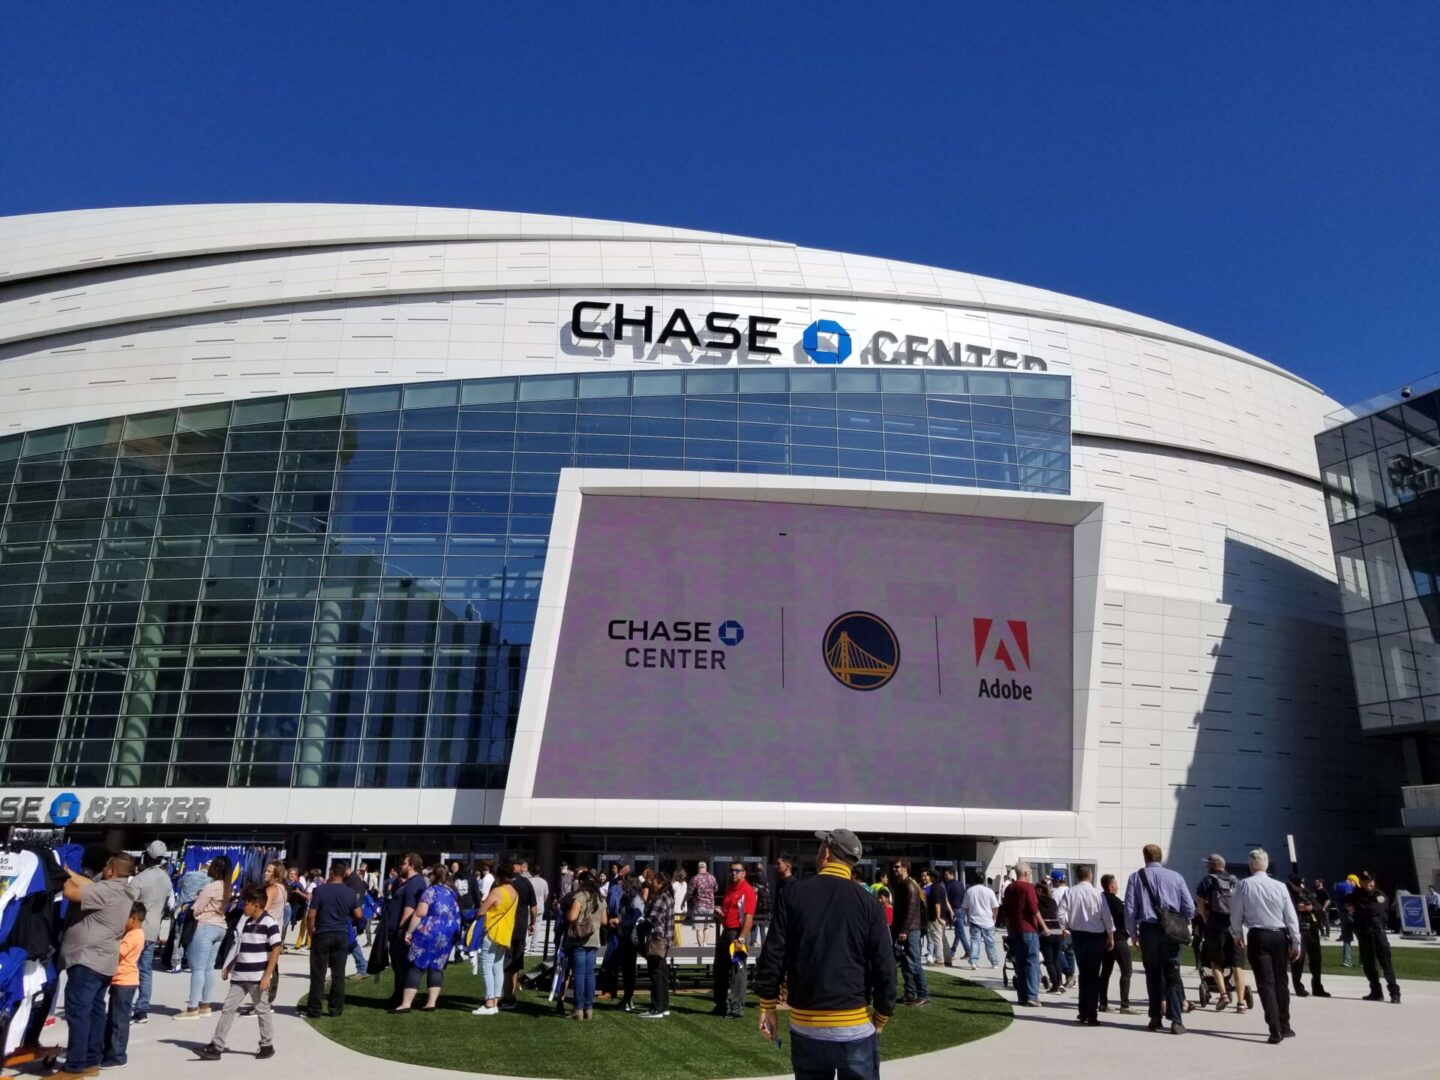 Outside view of chase center filled with people